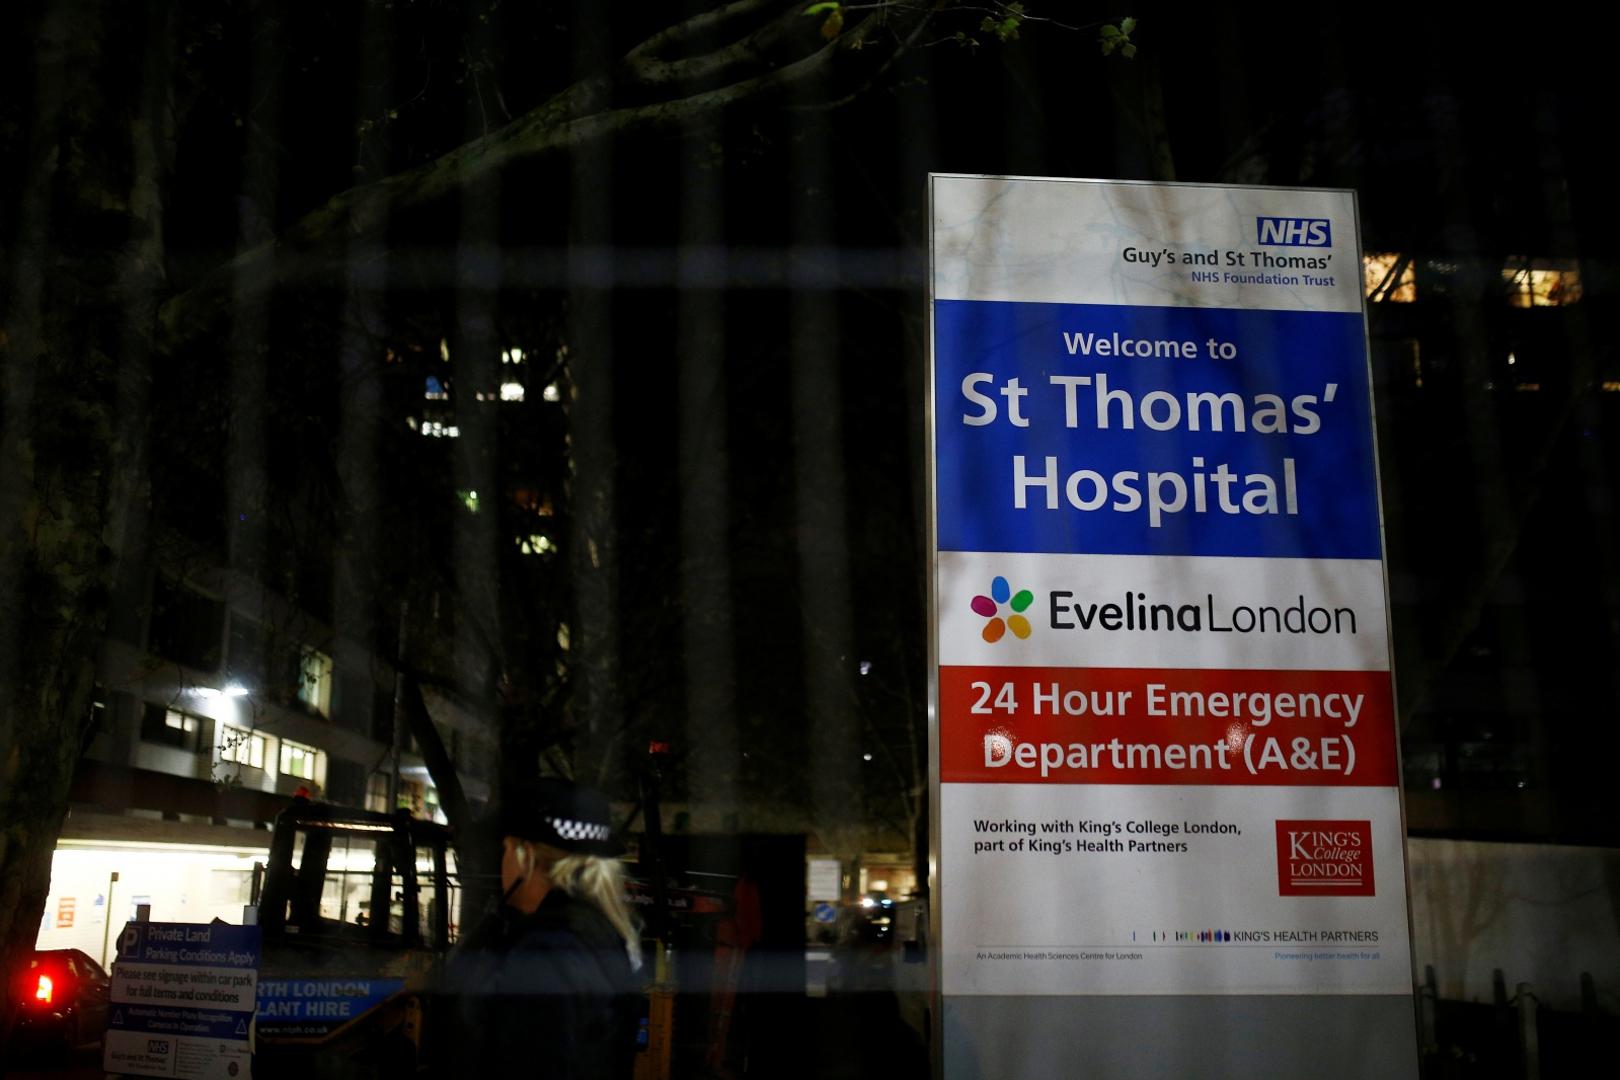 A police officer is seen in the St Thomas' Hospital after British Prime Minister Boris Johnson was moved to intensive care A police officer is seen in the St Thomas' Hospital after British Prime Minister Boris Johnson was moved to intensive care after his coronavirus (COVID-19) symptoms worsened and has asked Foreign Secretary Dominic Raab to deputise. London, Britain, April 6, 2020. REUTERS/Henry Nicholls HENRY NICHOLLS